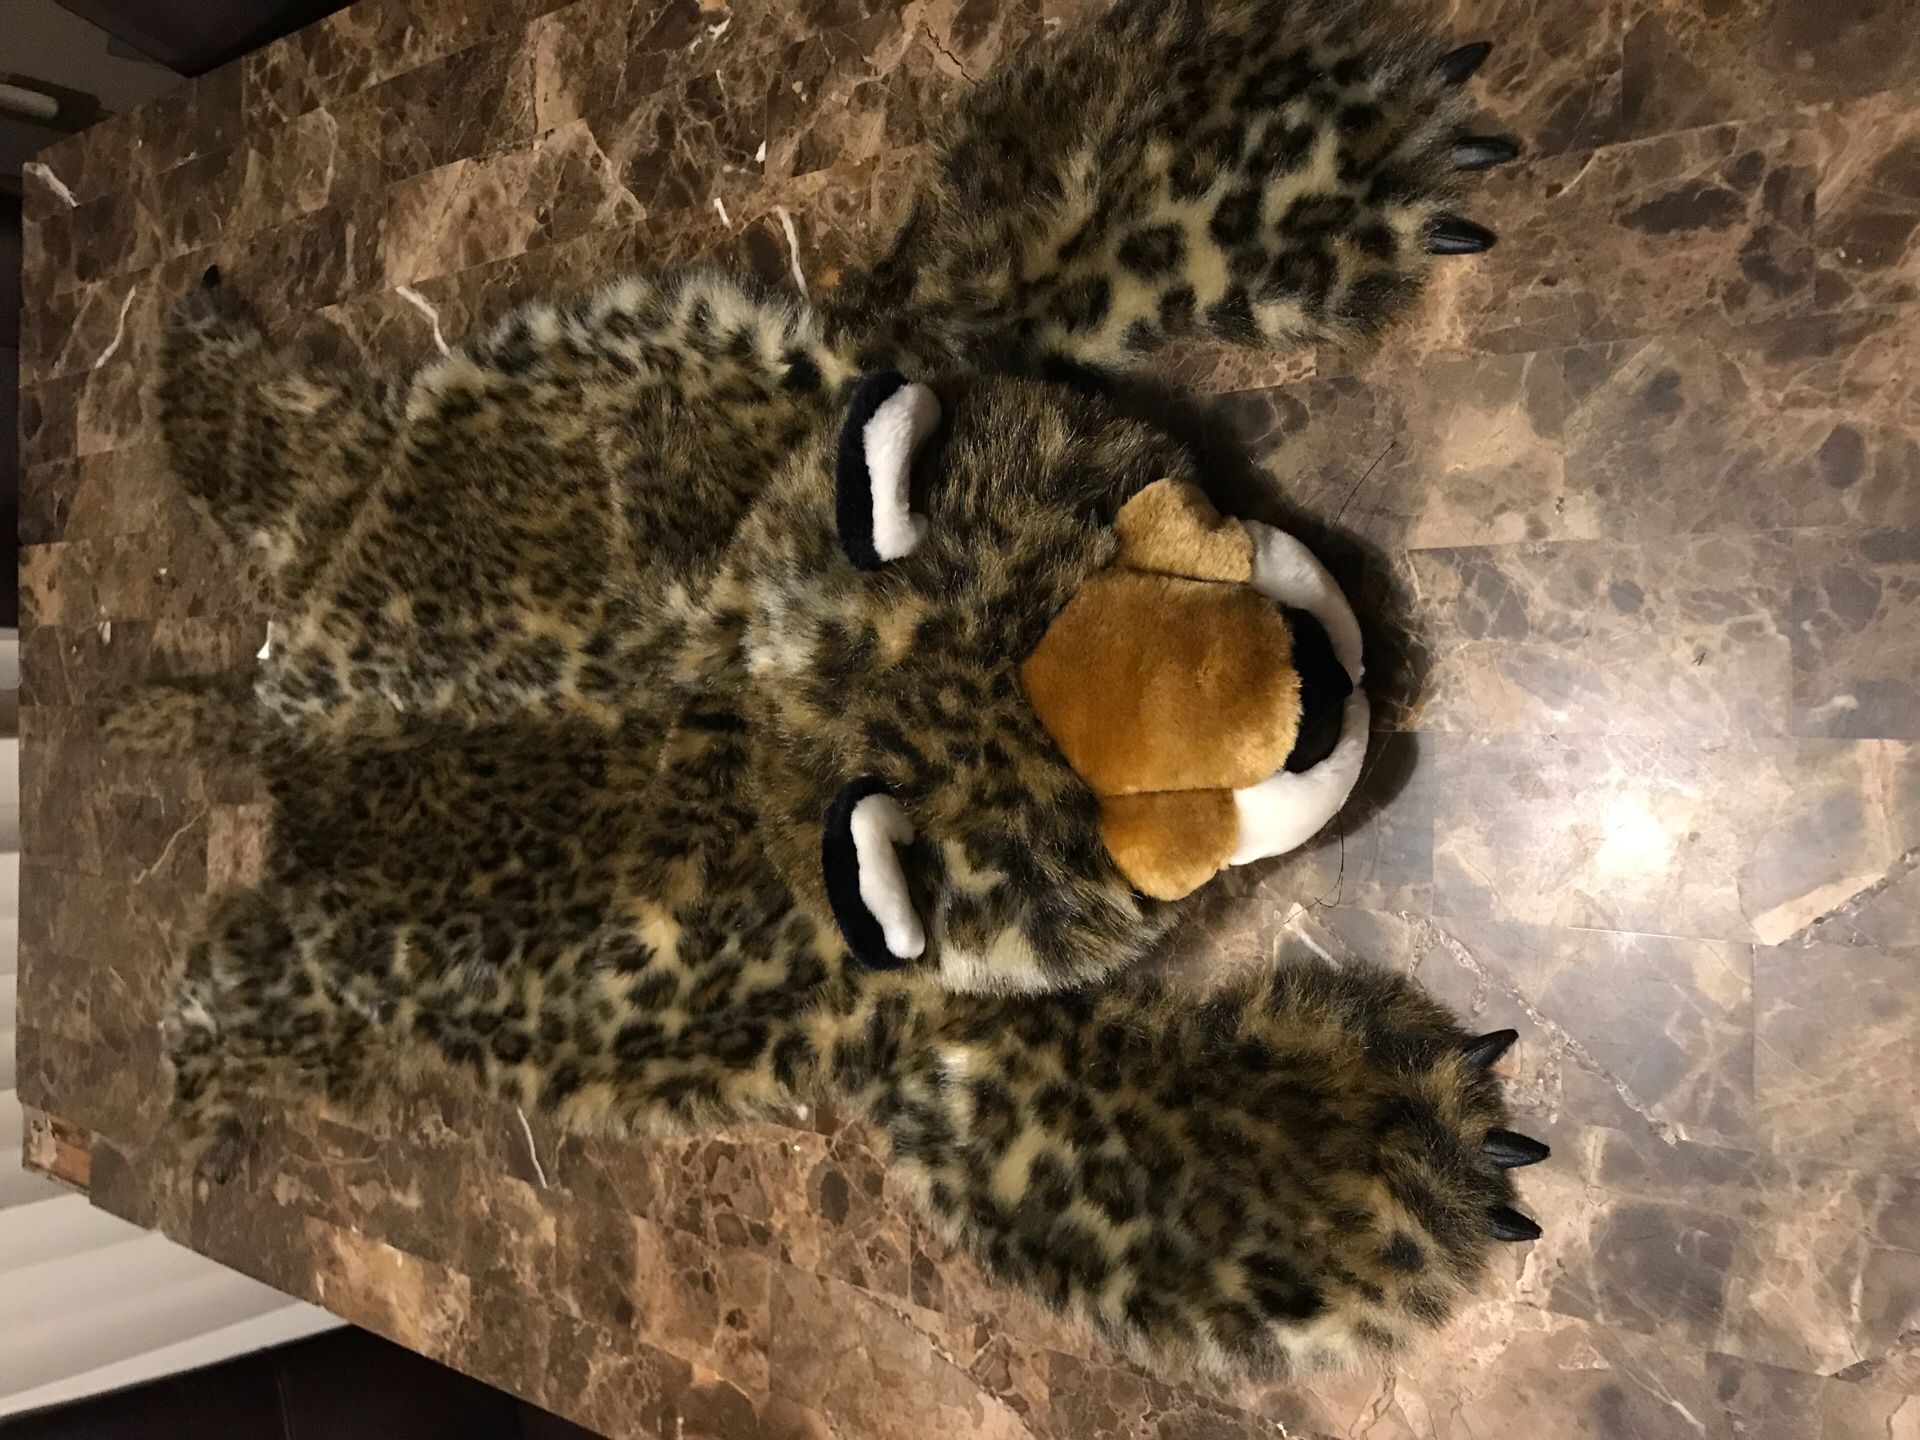 Soft adorable Plush Toy Jaguar Rug Faux Fake Pelt Cheetah Leopard Stuffed Animal Throw 48x36. Condition is Used. From smoke and pet free home. Thanks